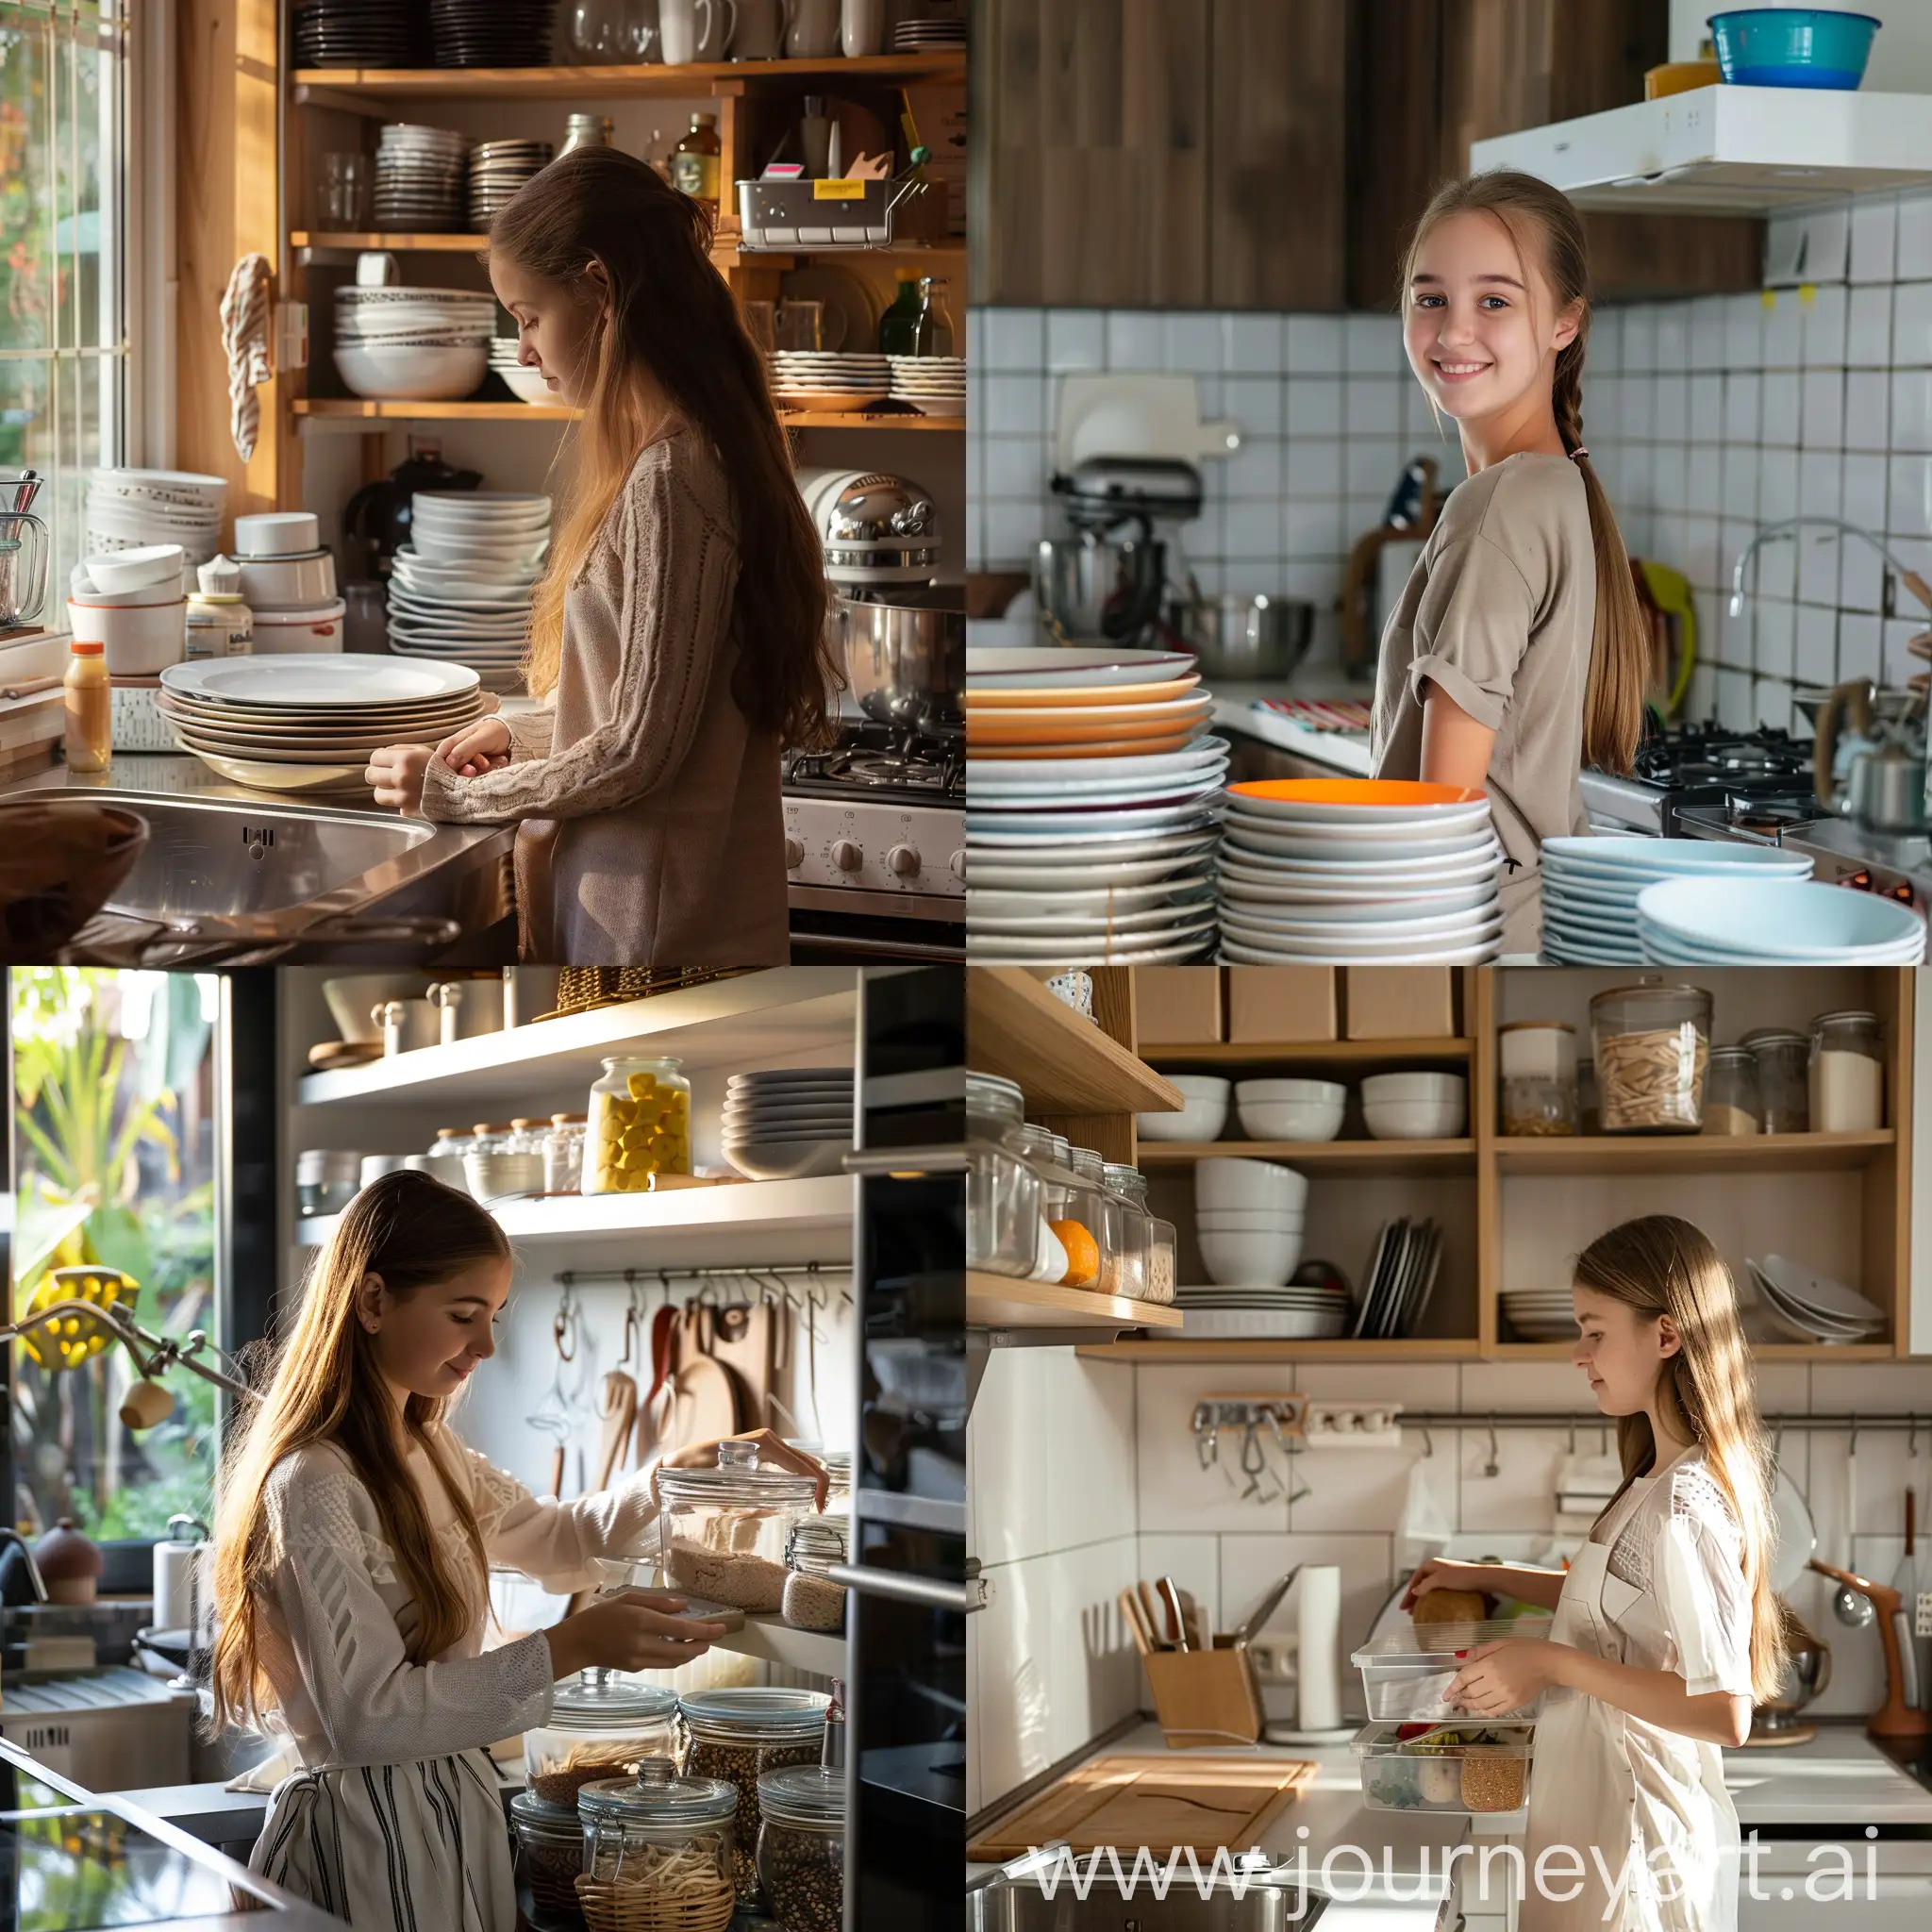 16 years old smart girl organizing her family kitchen